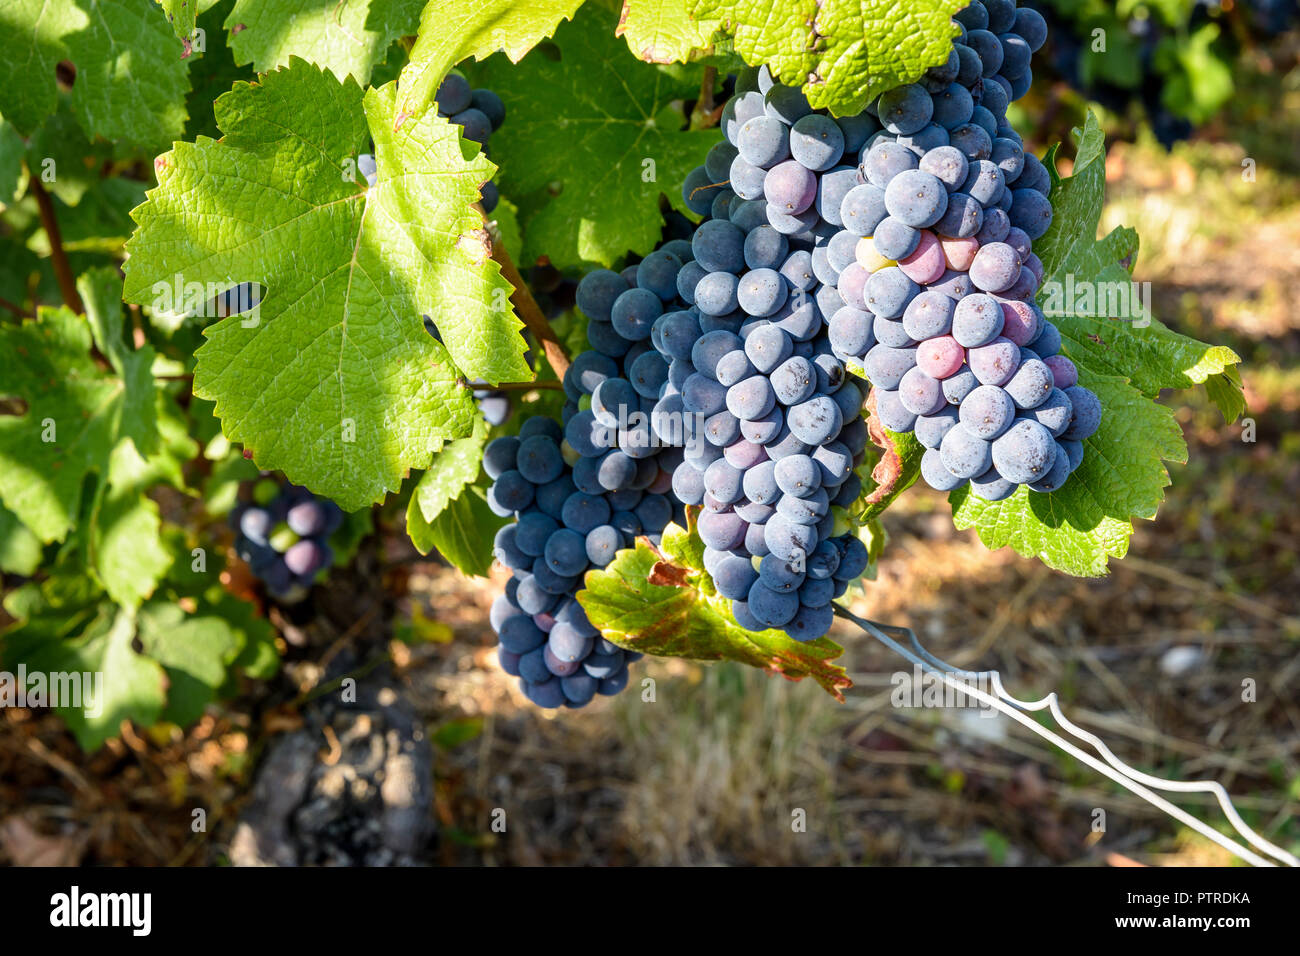 Large bunches of mature pinot noir grapes on an old vine stock in a Champagne vineyard, illuminated by the warm sunlight of late afternoon. Stock Photo